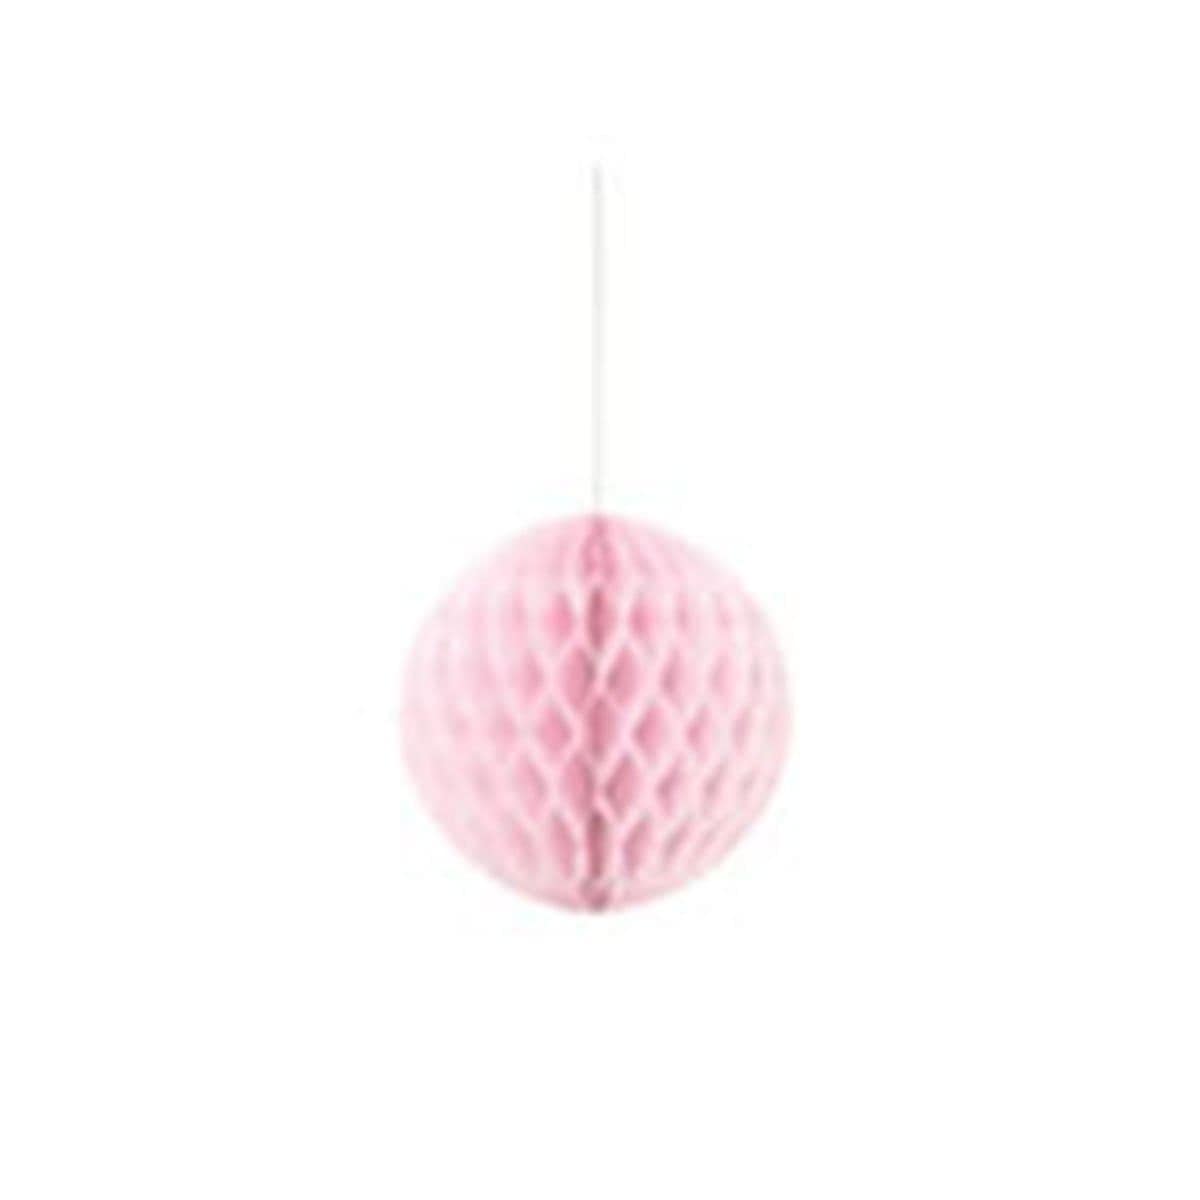 Buy Decorations Honeycomb Ball 8 In. - Pink sold at Party Expert